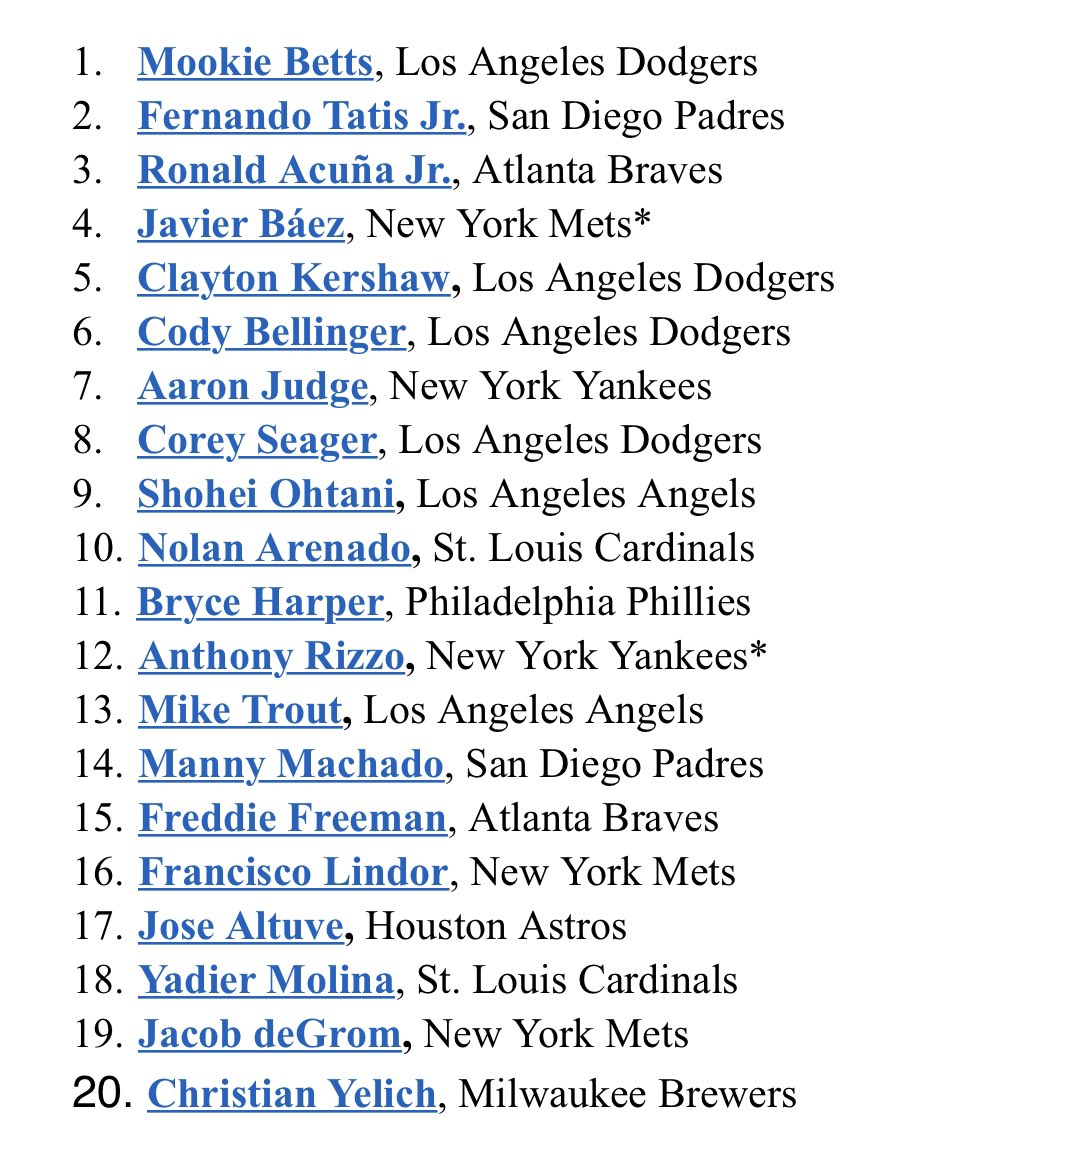 Los Angeles Dodgers Mookie Betts and Cody Bellinger top MLB jersey sales  Los Angeles Angels Mike Trout is 10th  ABC7 Chicago